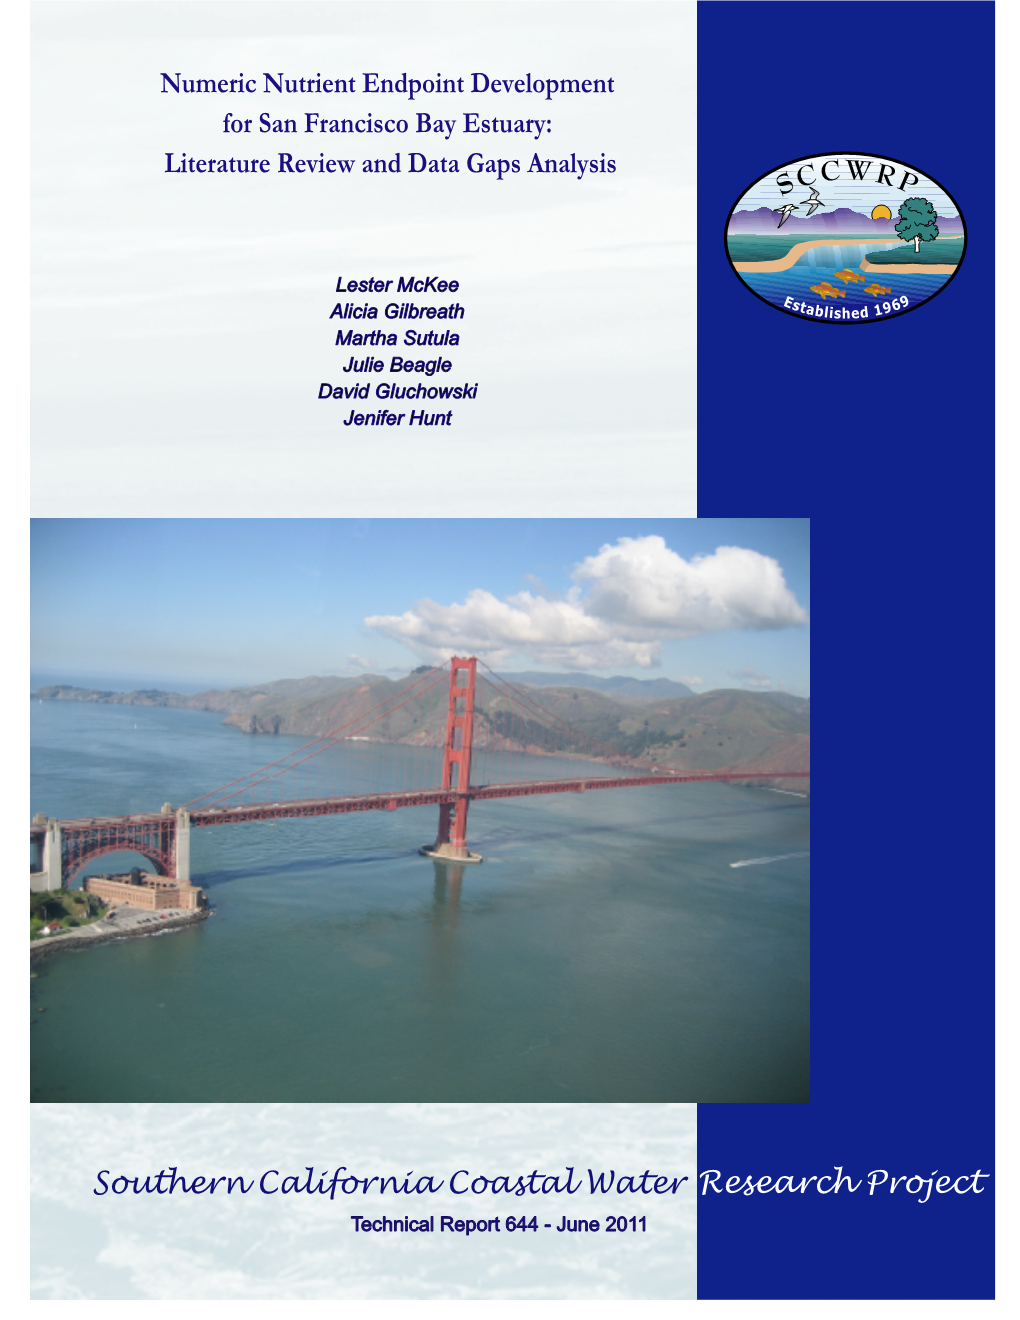 Numeric Nutrient Endpoint Development for San Francisco Bay Estuary: Literature Review and Data Gaps Analysis